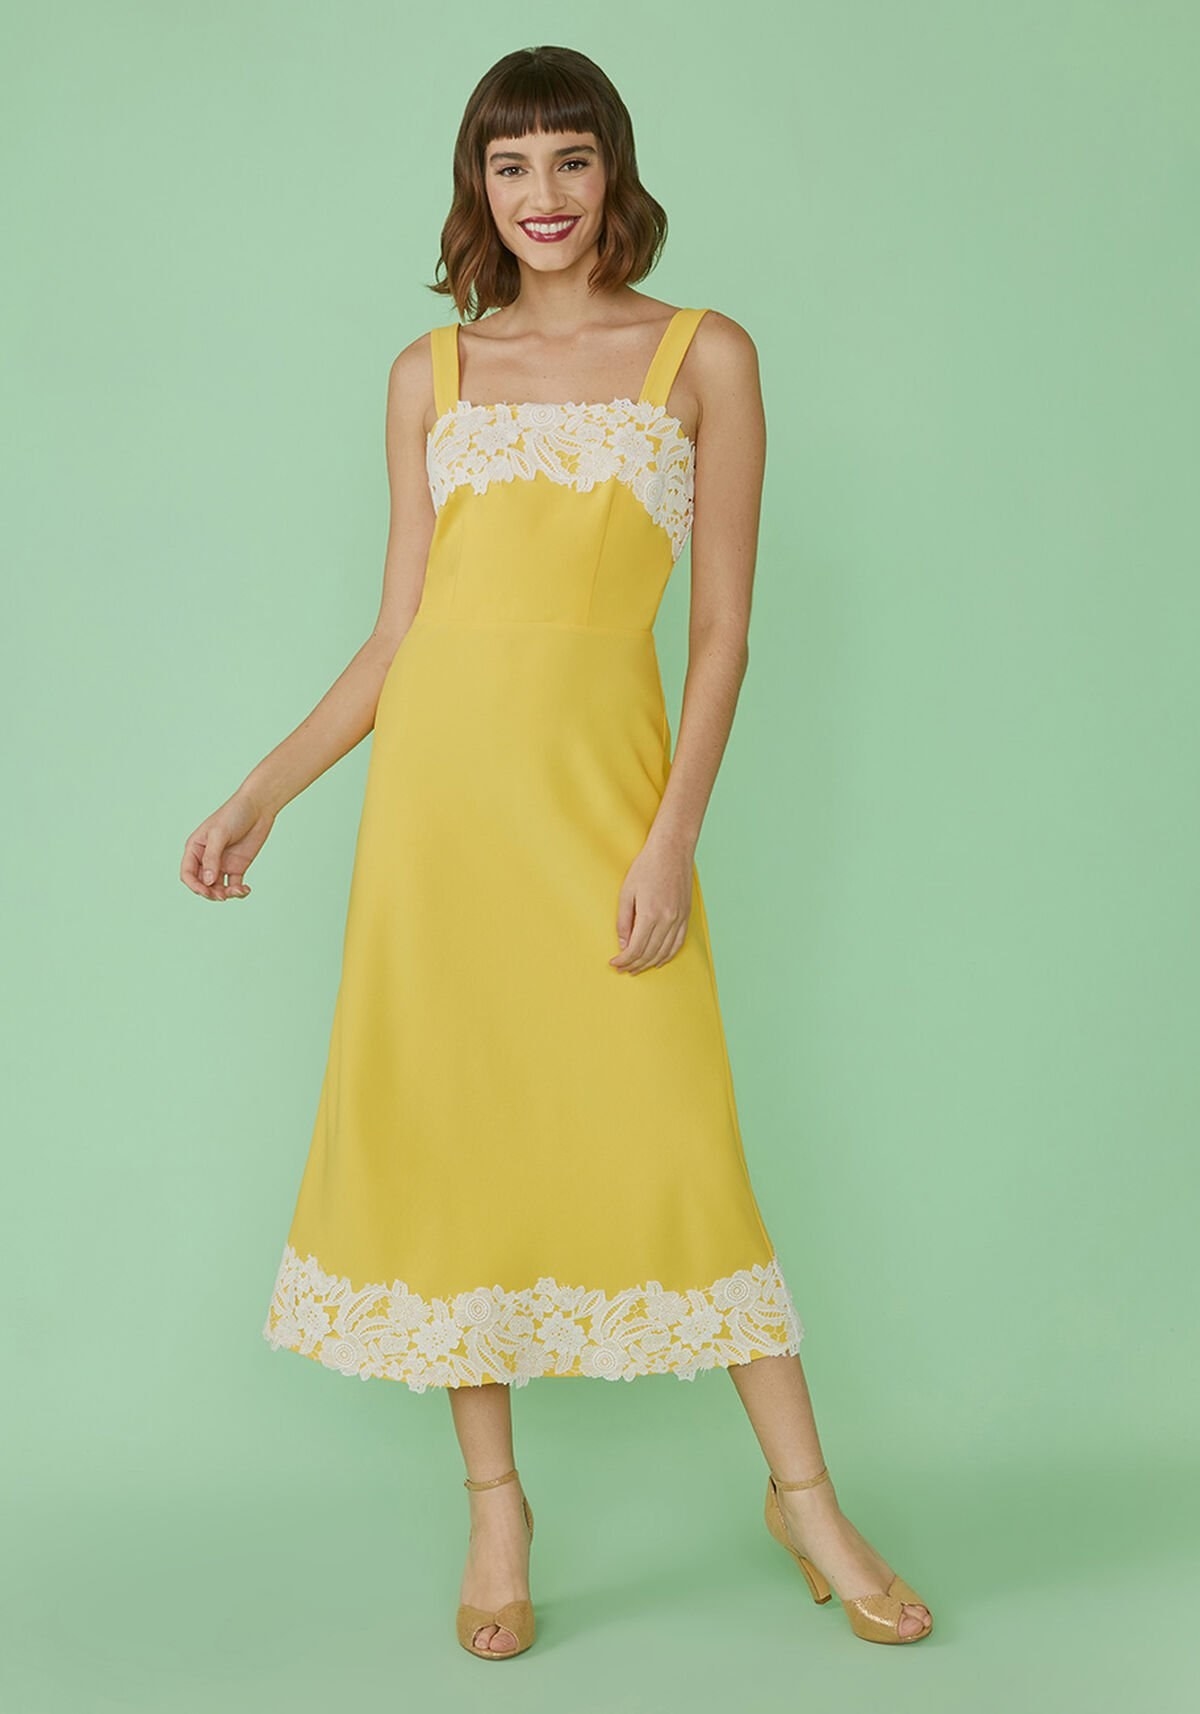 a model wearing a yellow dress with white lace trim along the top and bottom